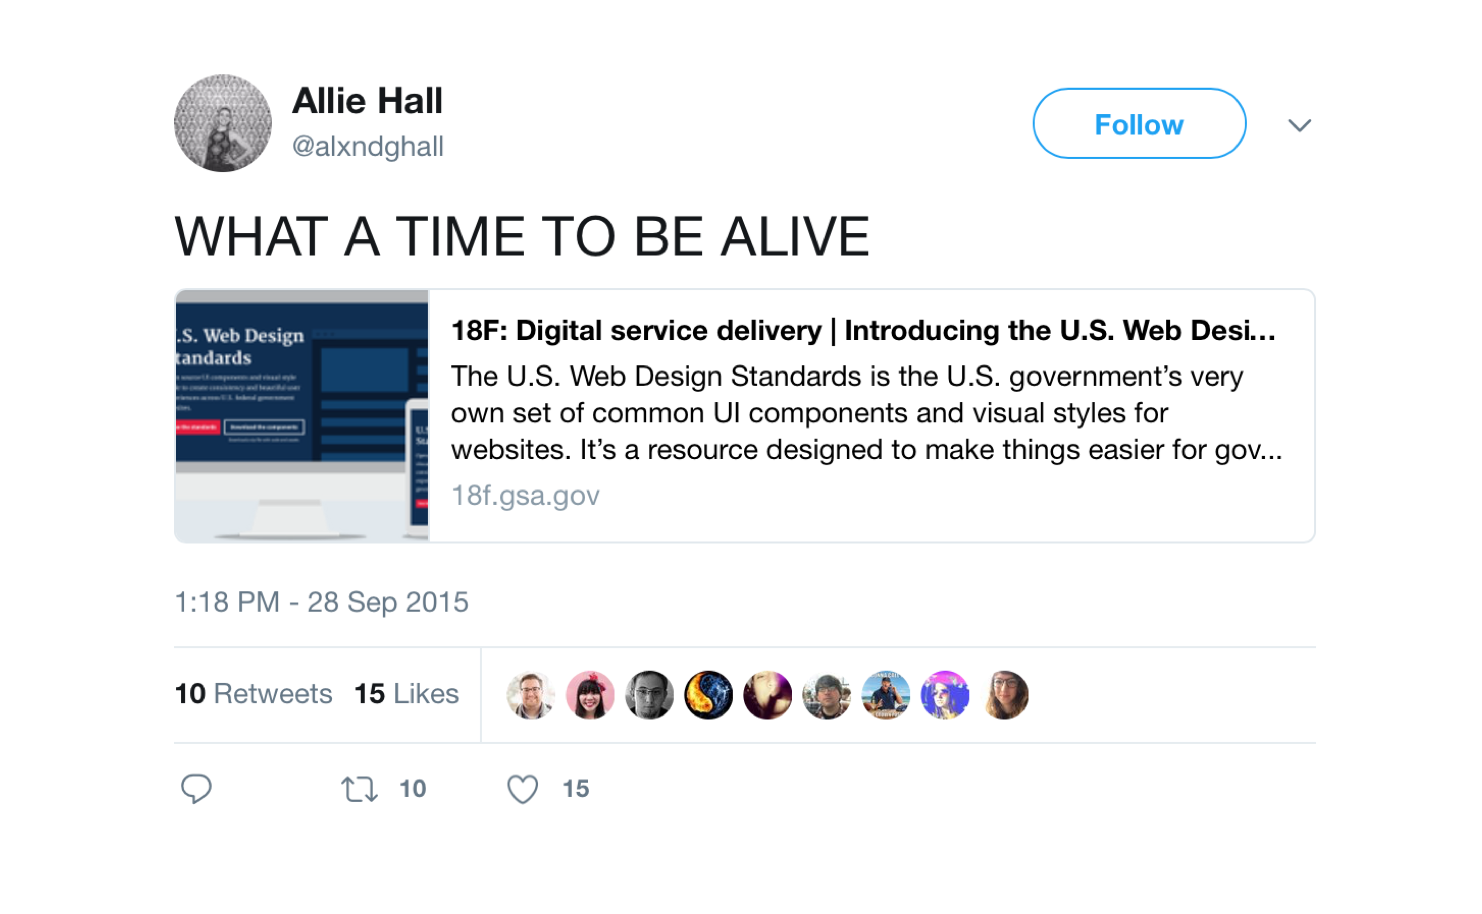 Tweet from @alxndghall saying, 'WHAT A TIME TO BE ALIVE' and linking to a blog post about the web design standards